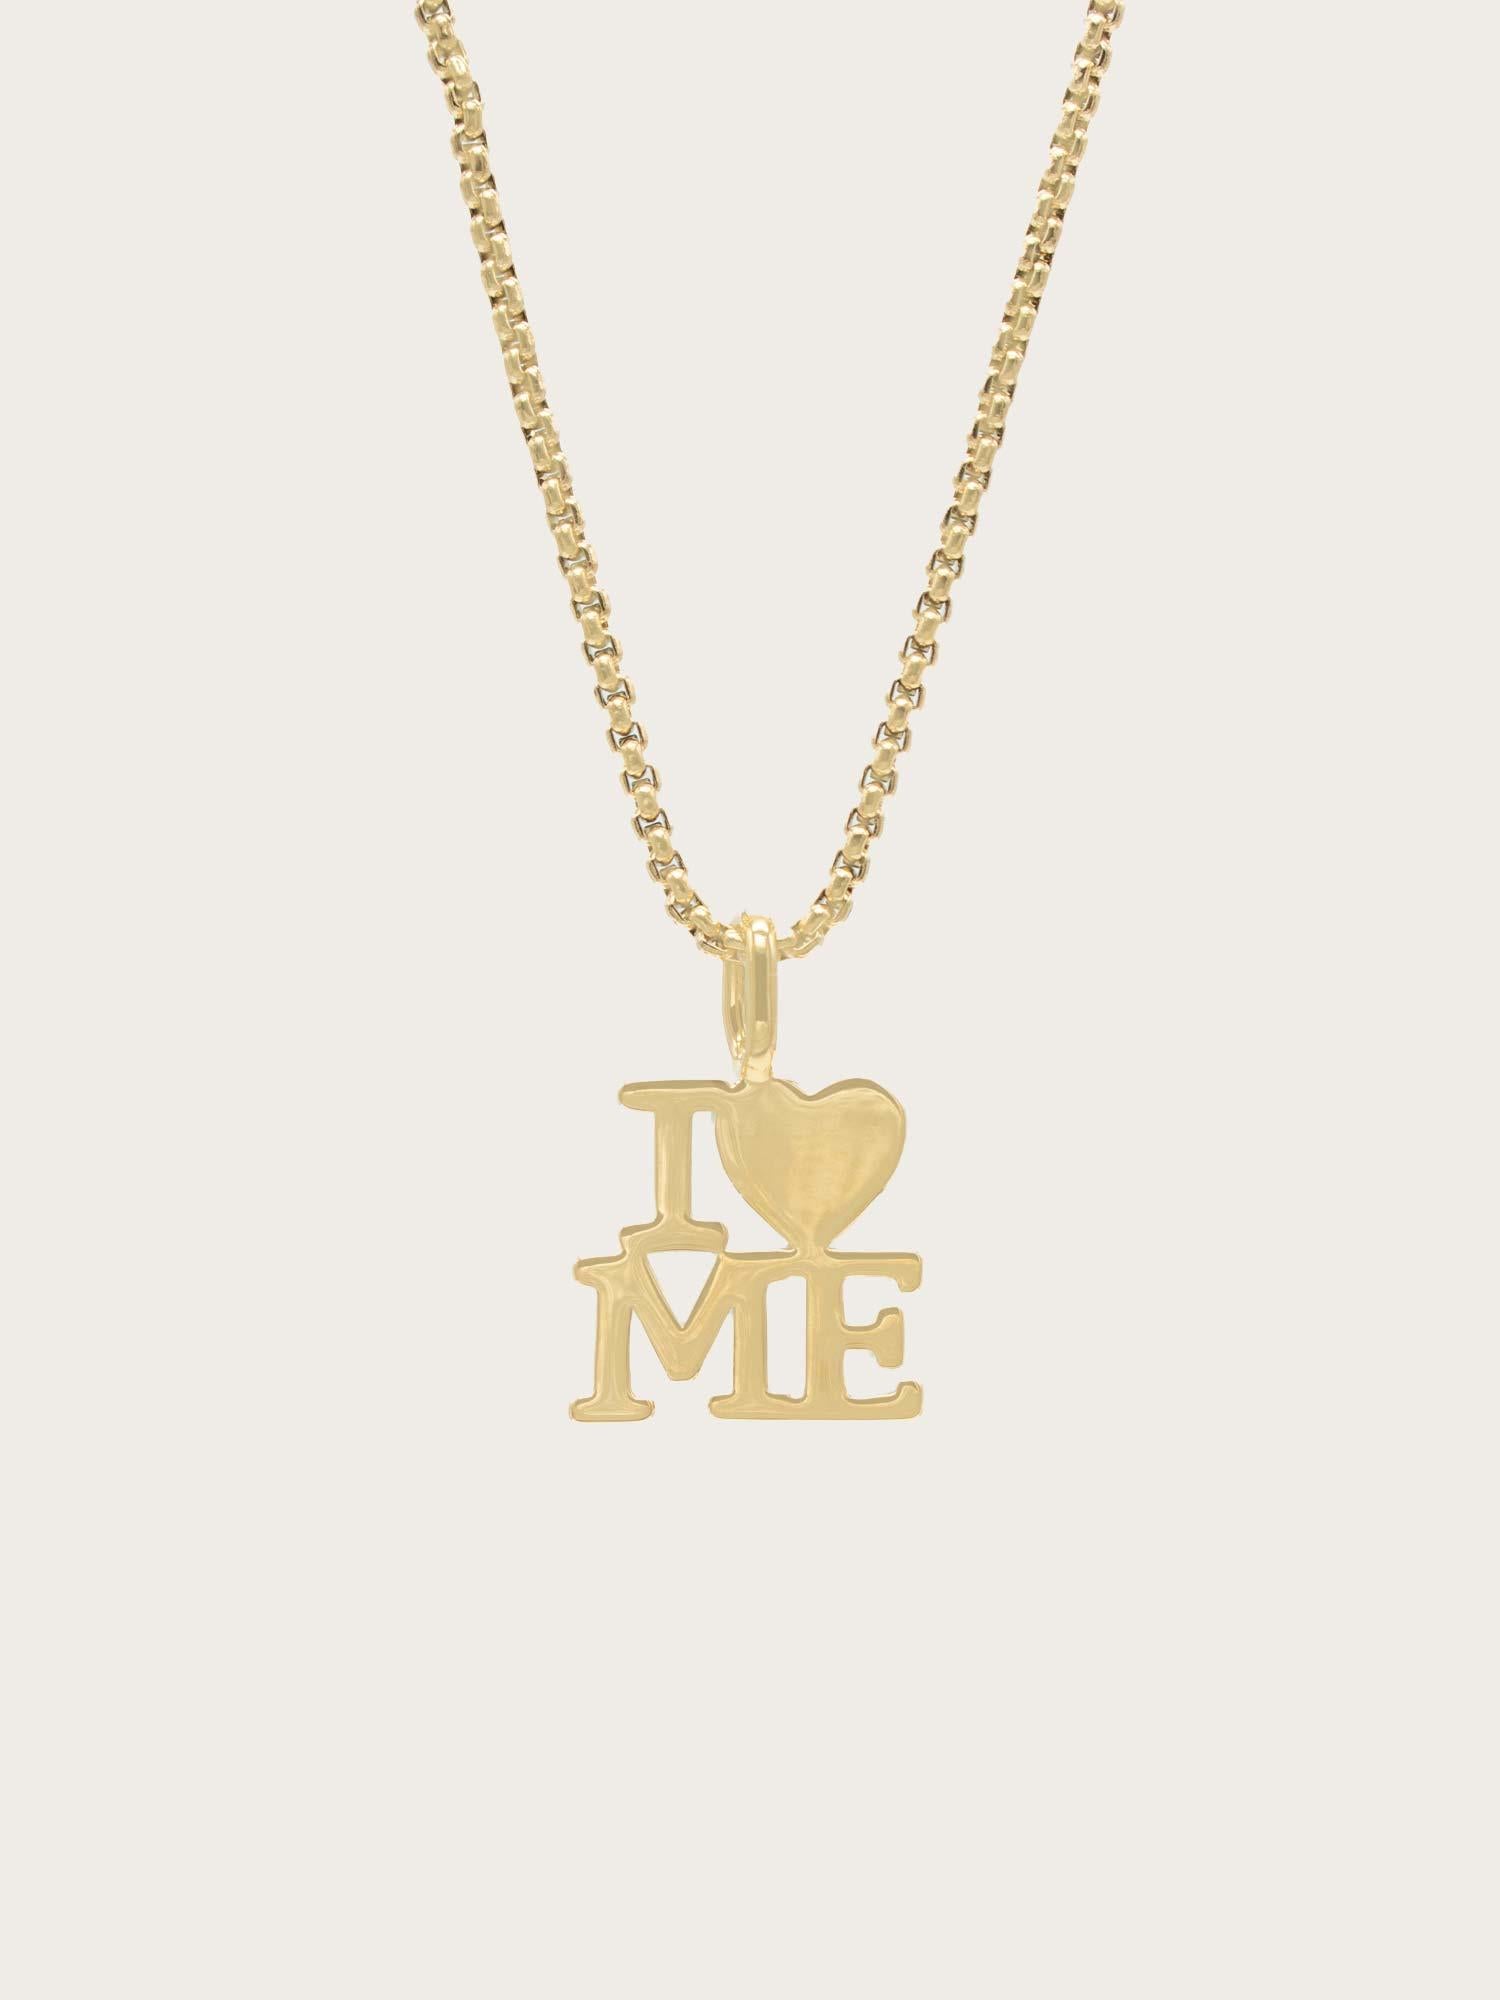 Love ME Necklace - Gold